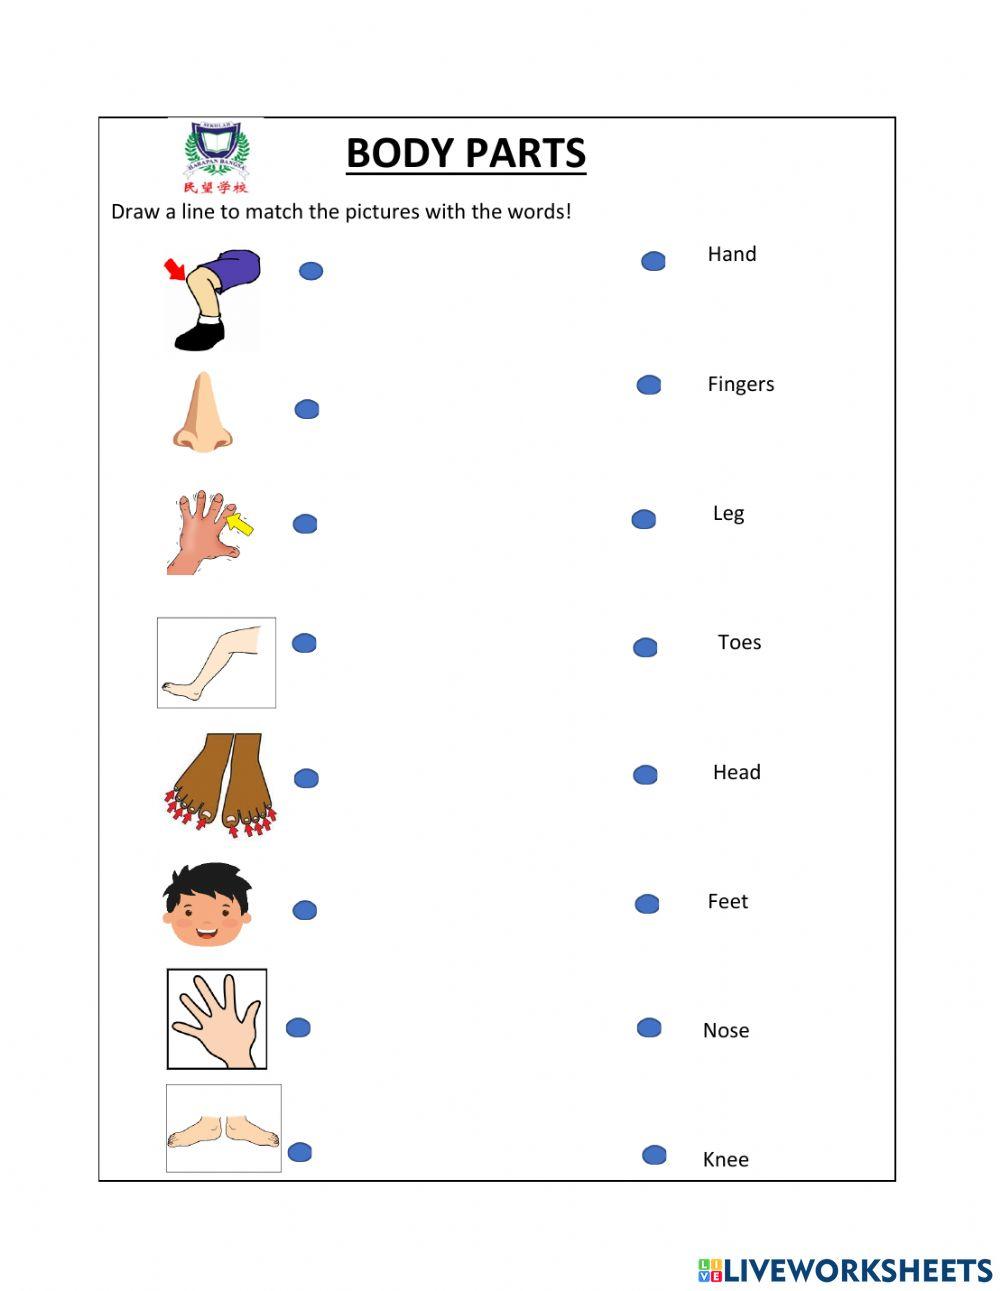 Our Body Parts